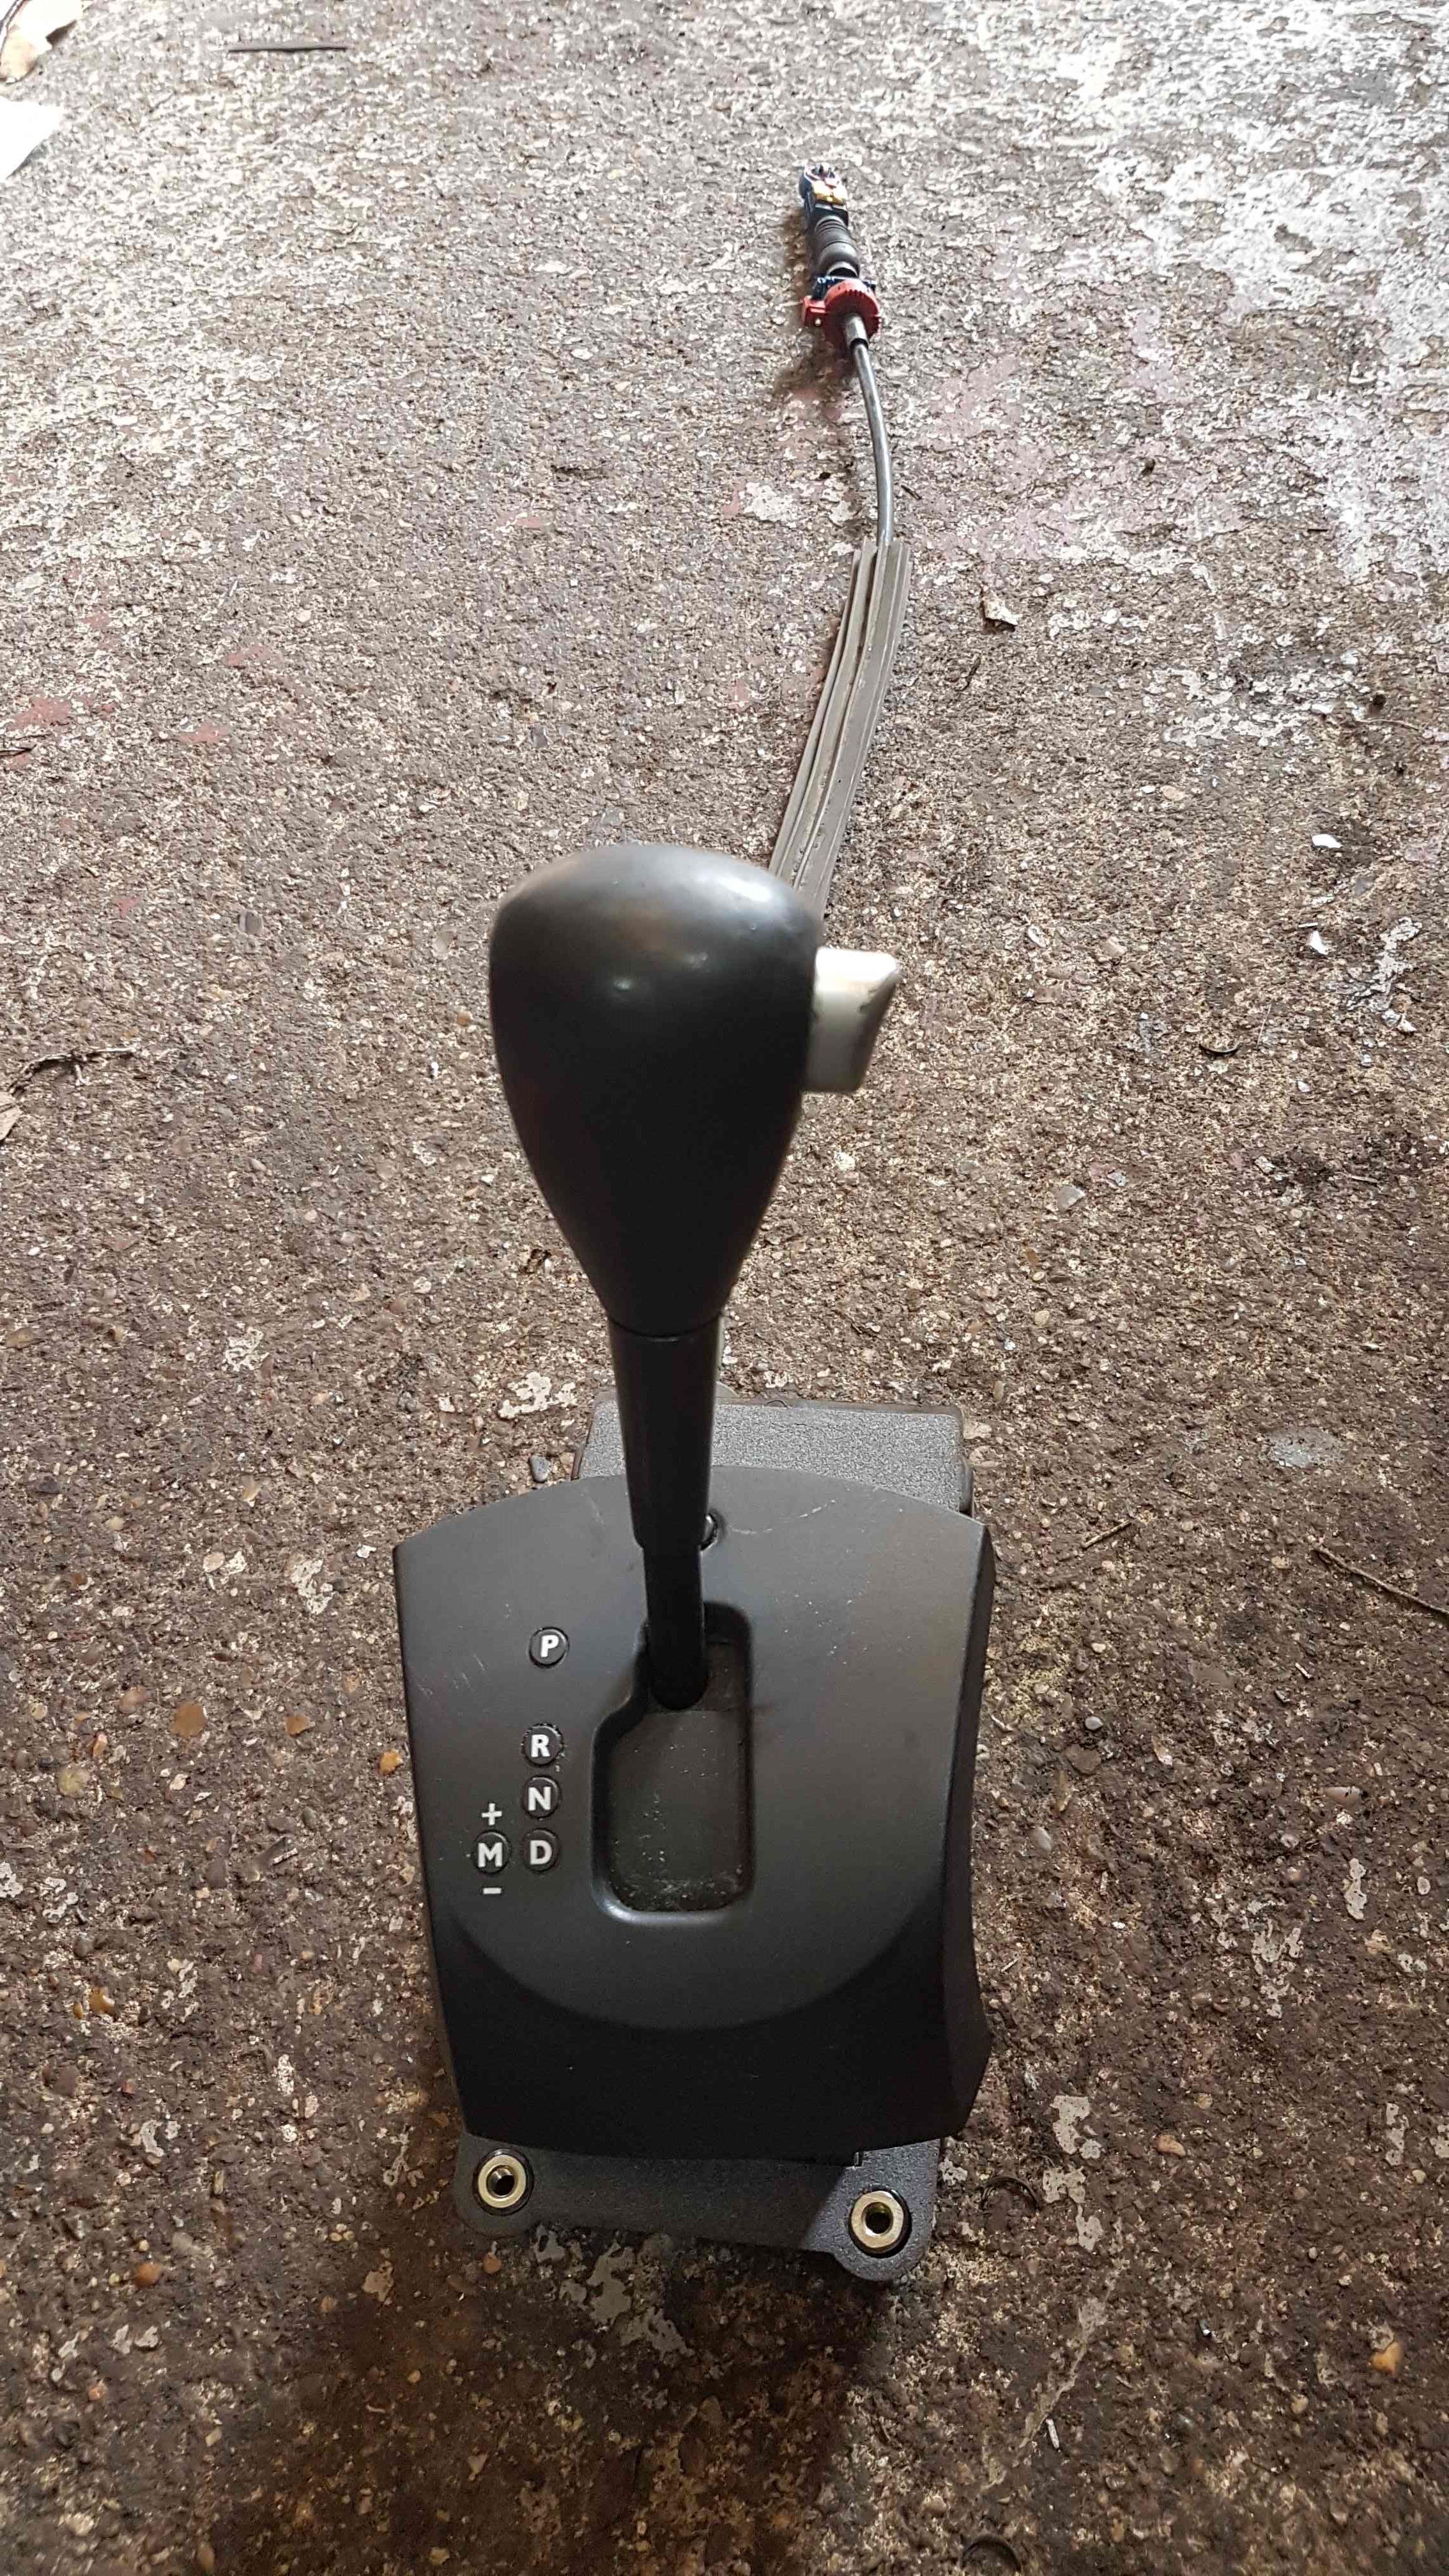 Renault Clio MK3 2009-2012 Gear Stick Gaitor Leather Surround Silver Trim -  Store - Renault Breakers - Used Renault Car Parts & Spares Specialist